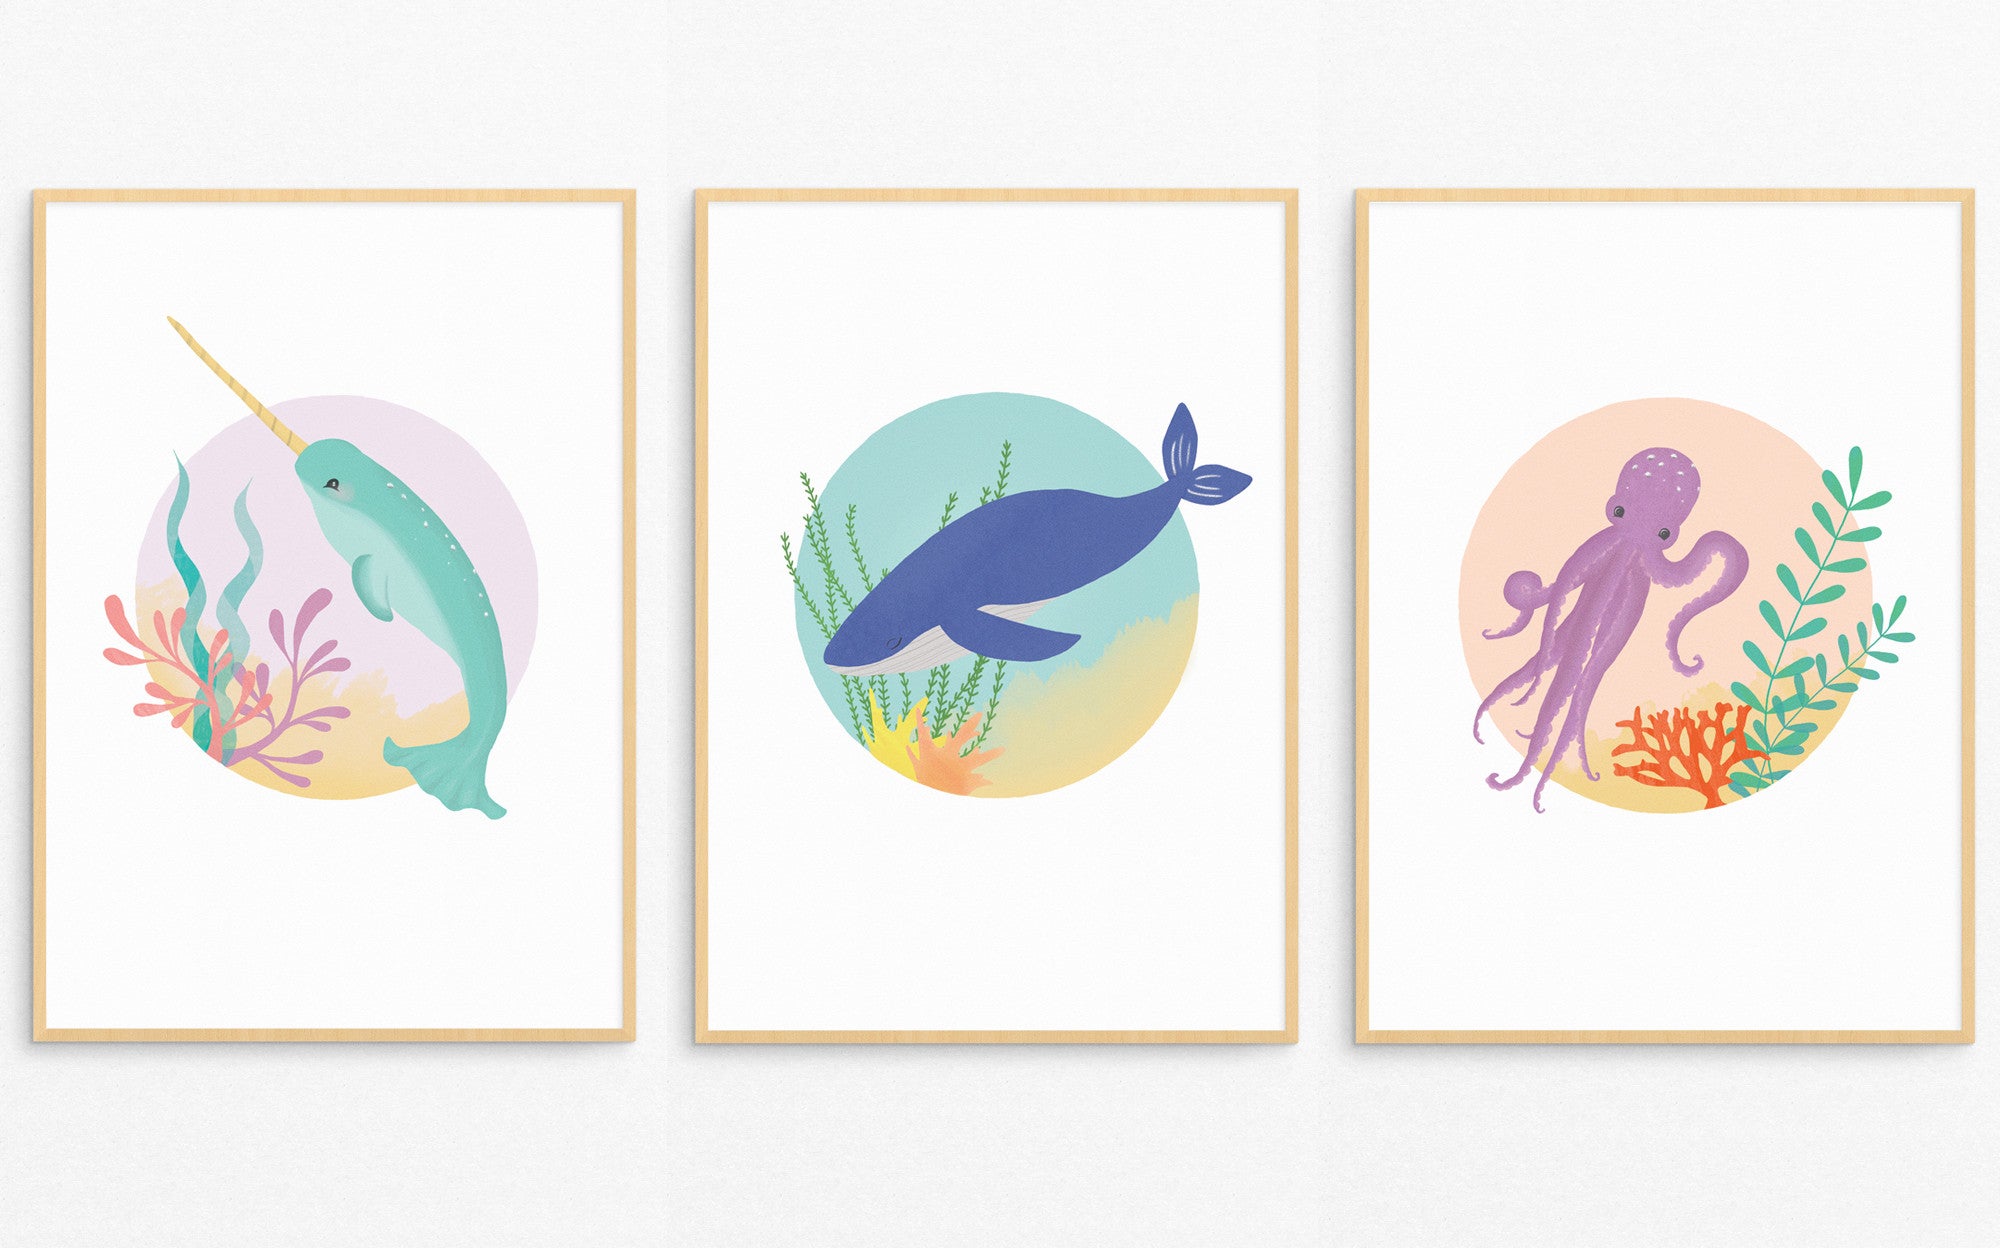 Narwhal, Whale and Octopus sea-themed prints by Born Lucky for Bobby Rabbit.